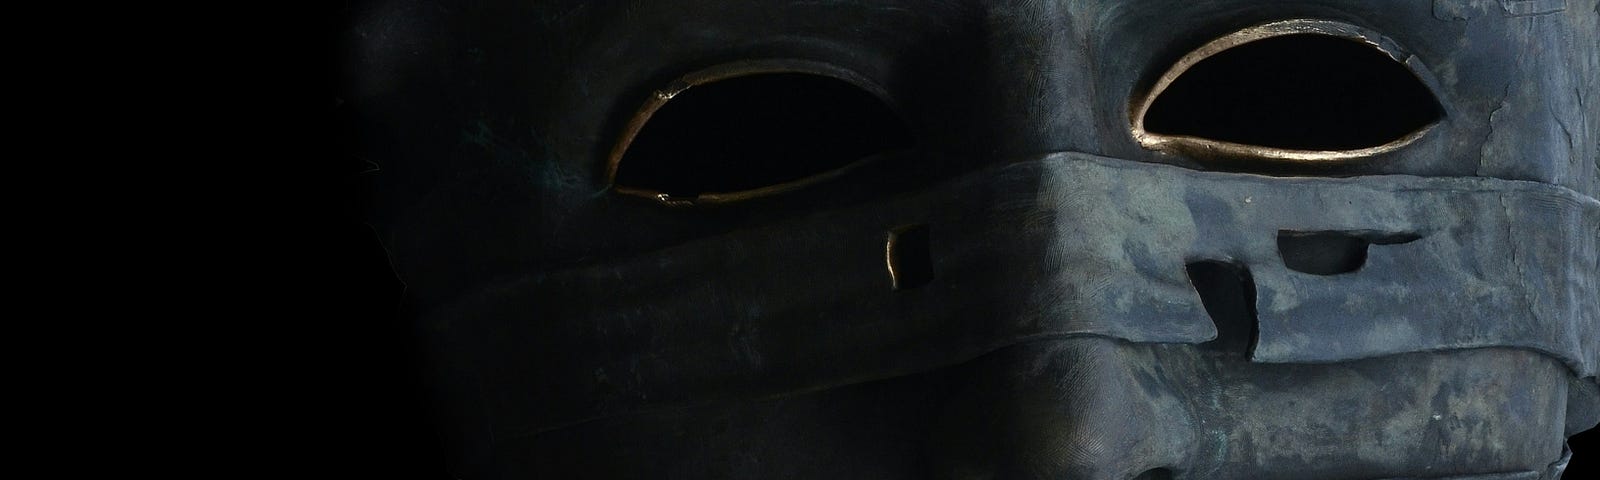 A grey, tattered, mask with gold around the eyes, on a black background